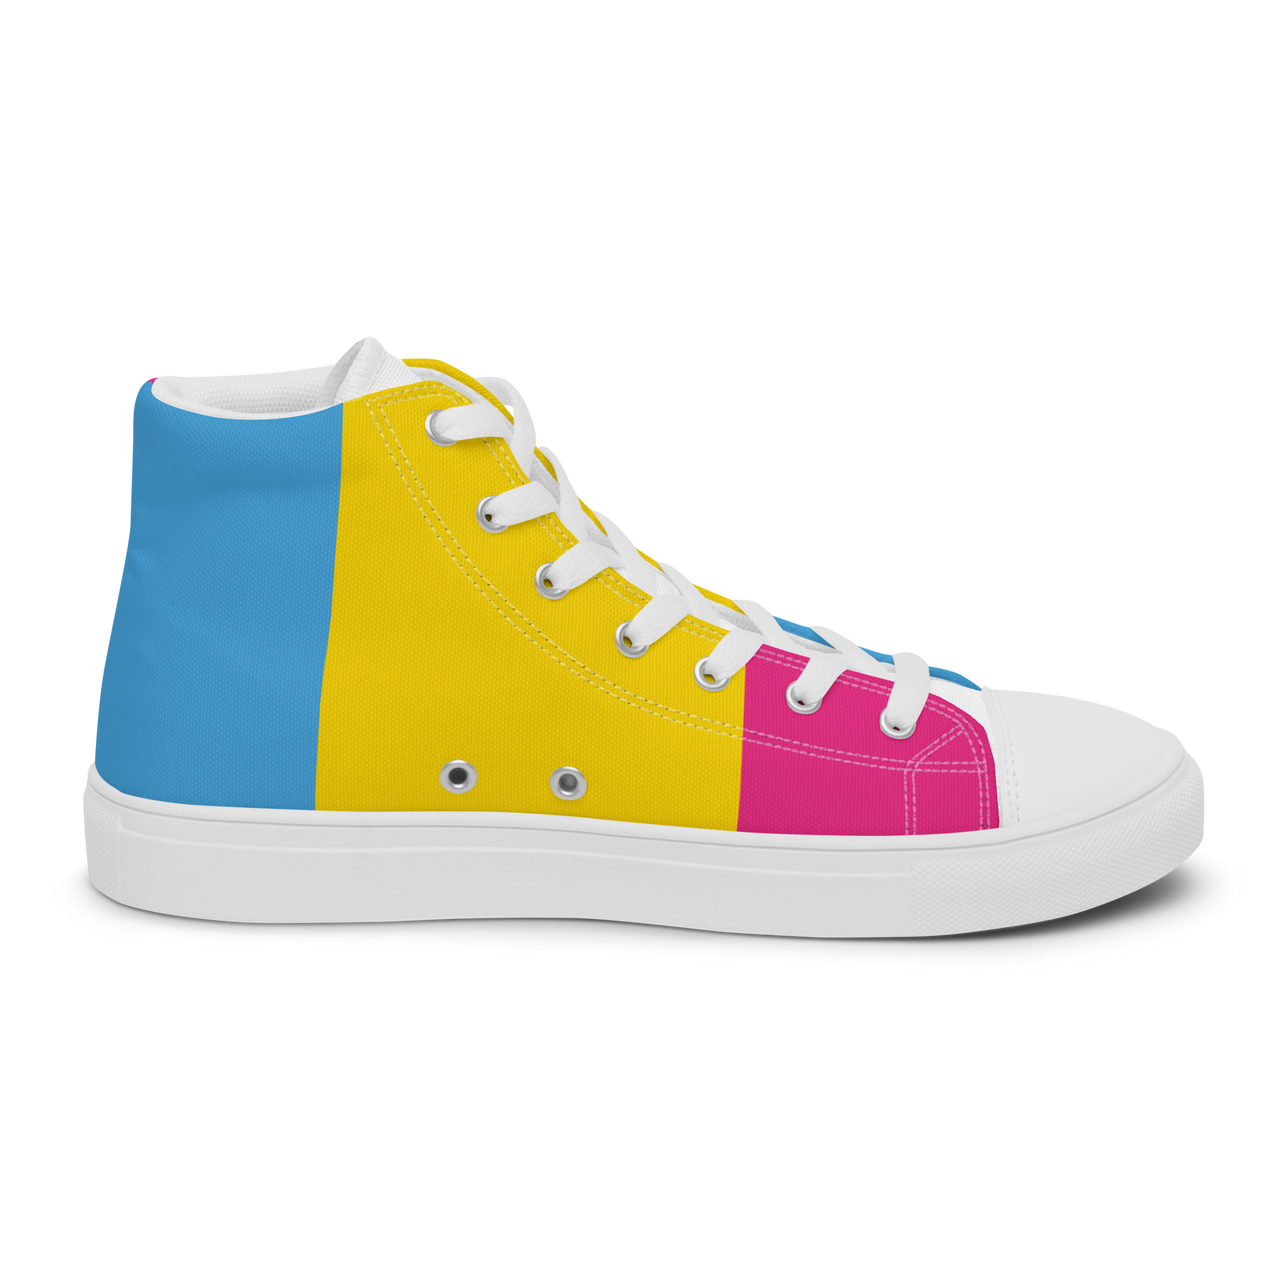 Pansexual Flag LGBTQ High Top Canvas Shoes Women’s Size SHAVA